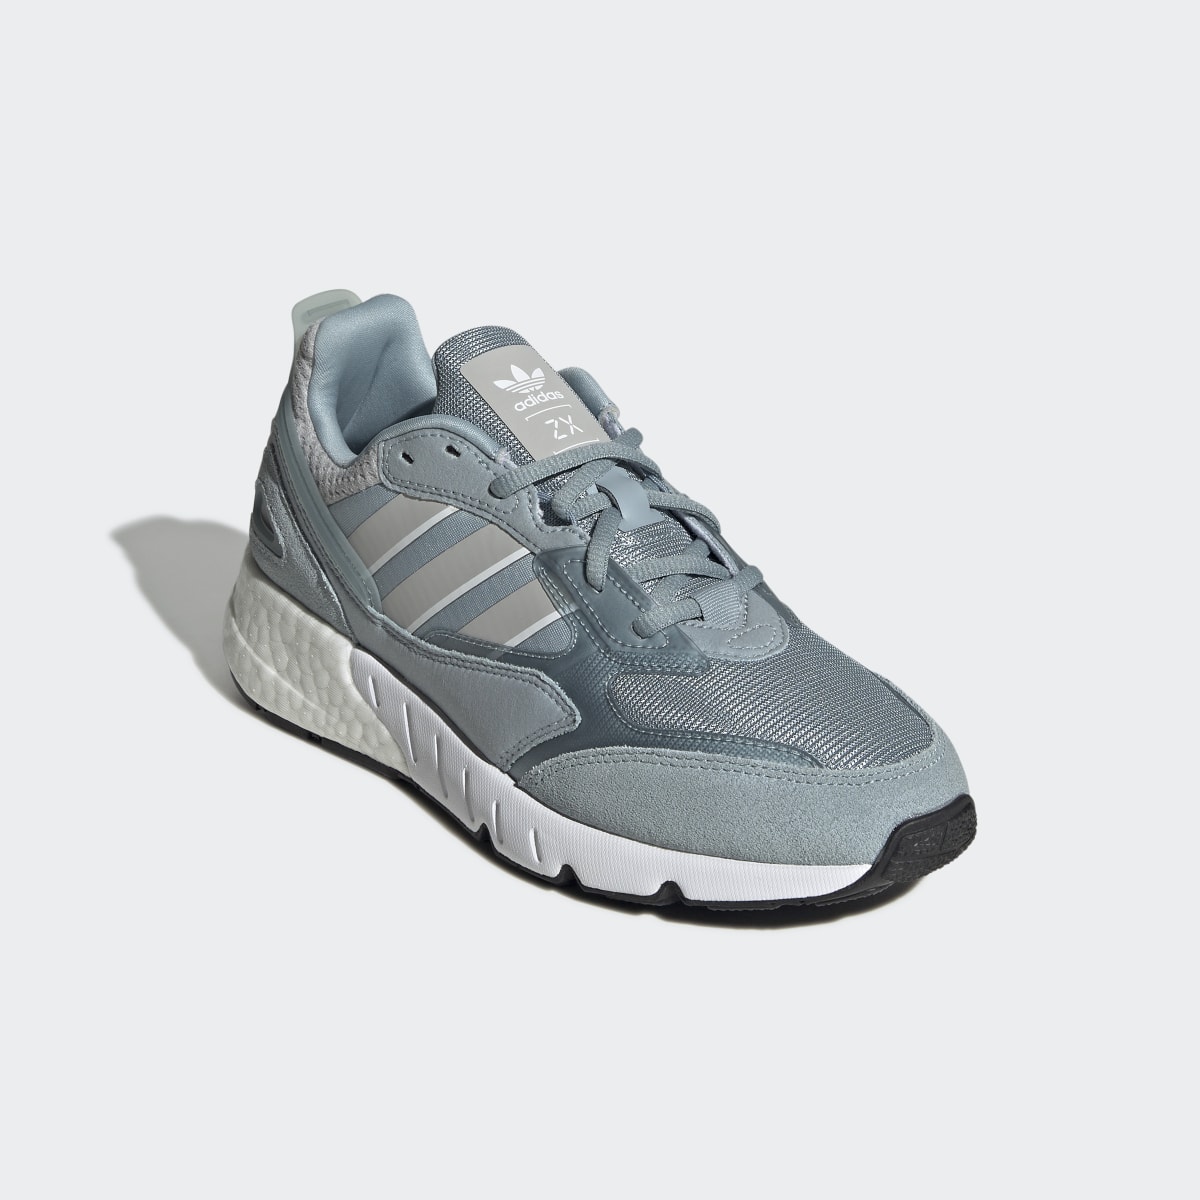 Adidas ZX 1K BOOST 2.0 Shoes. 5